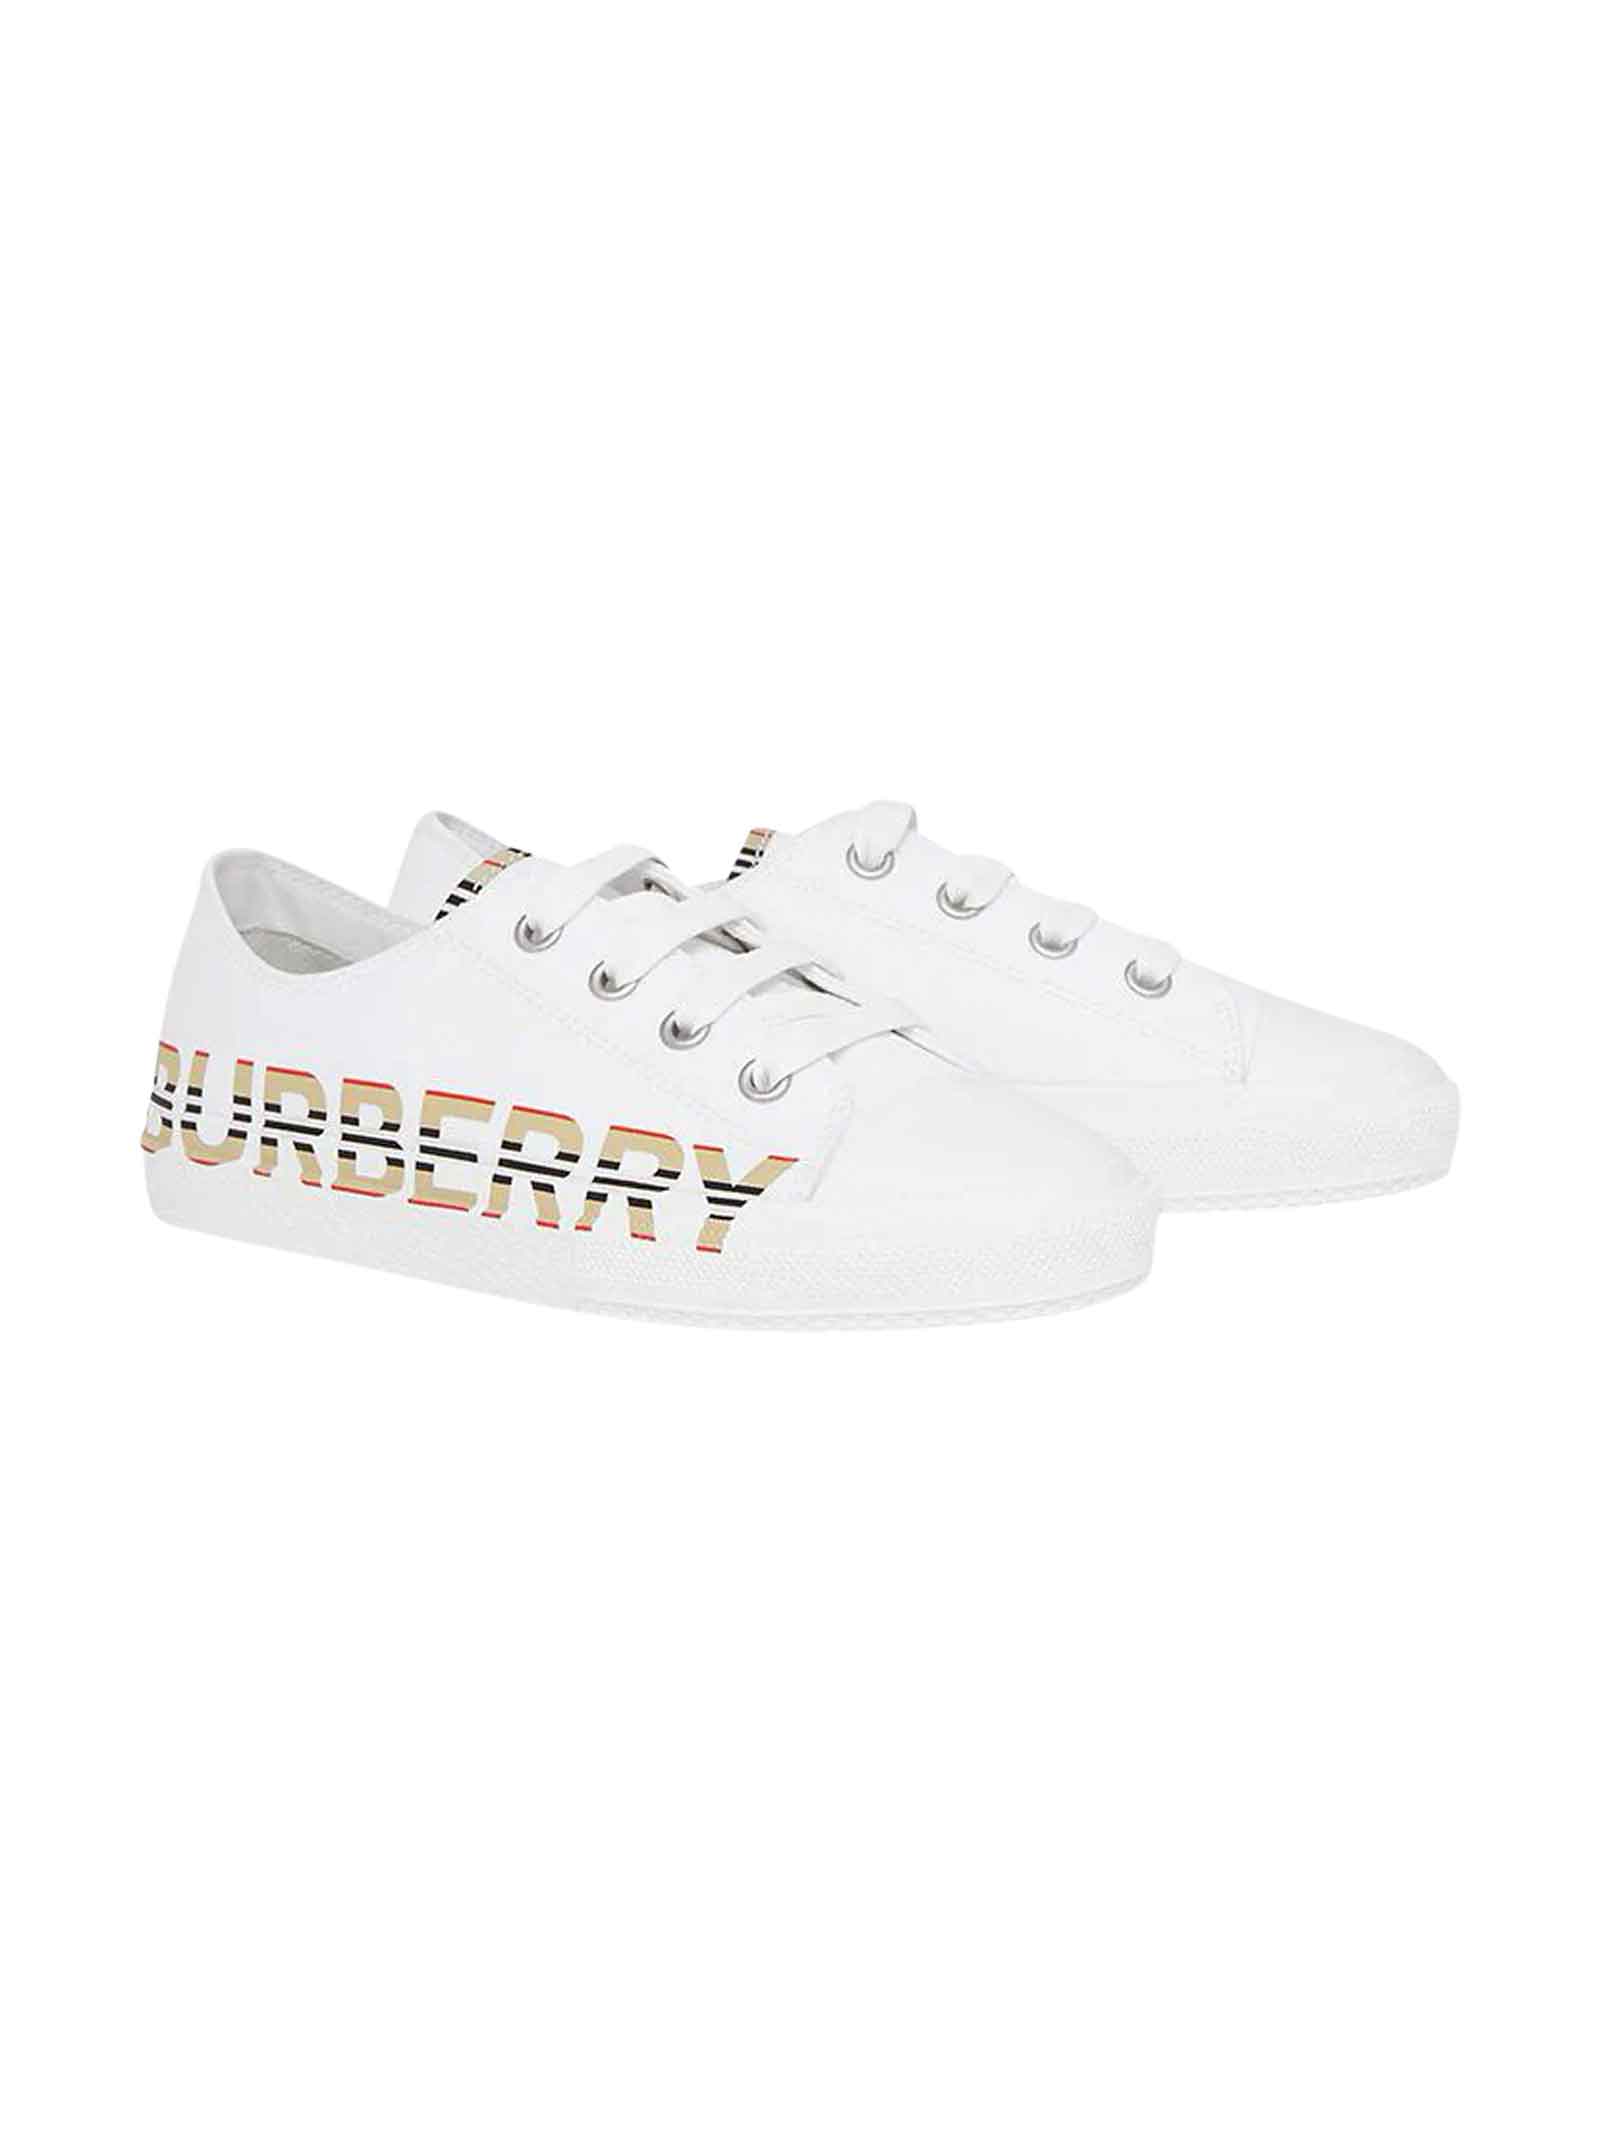 Burberry White Shoes Unisex